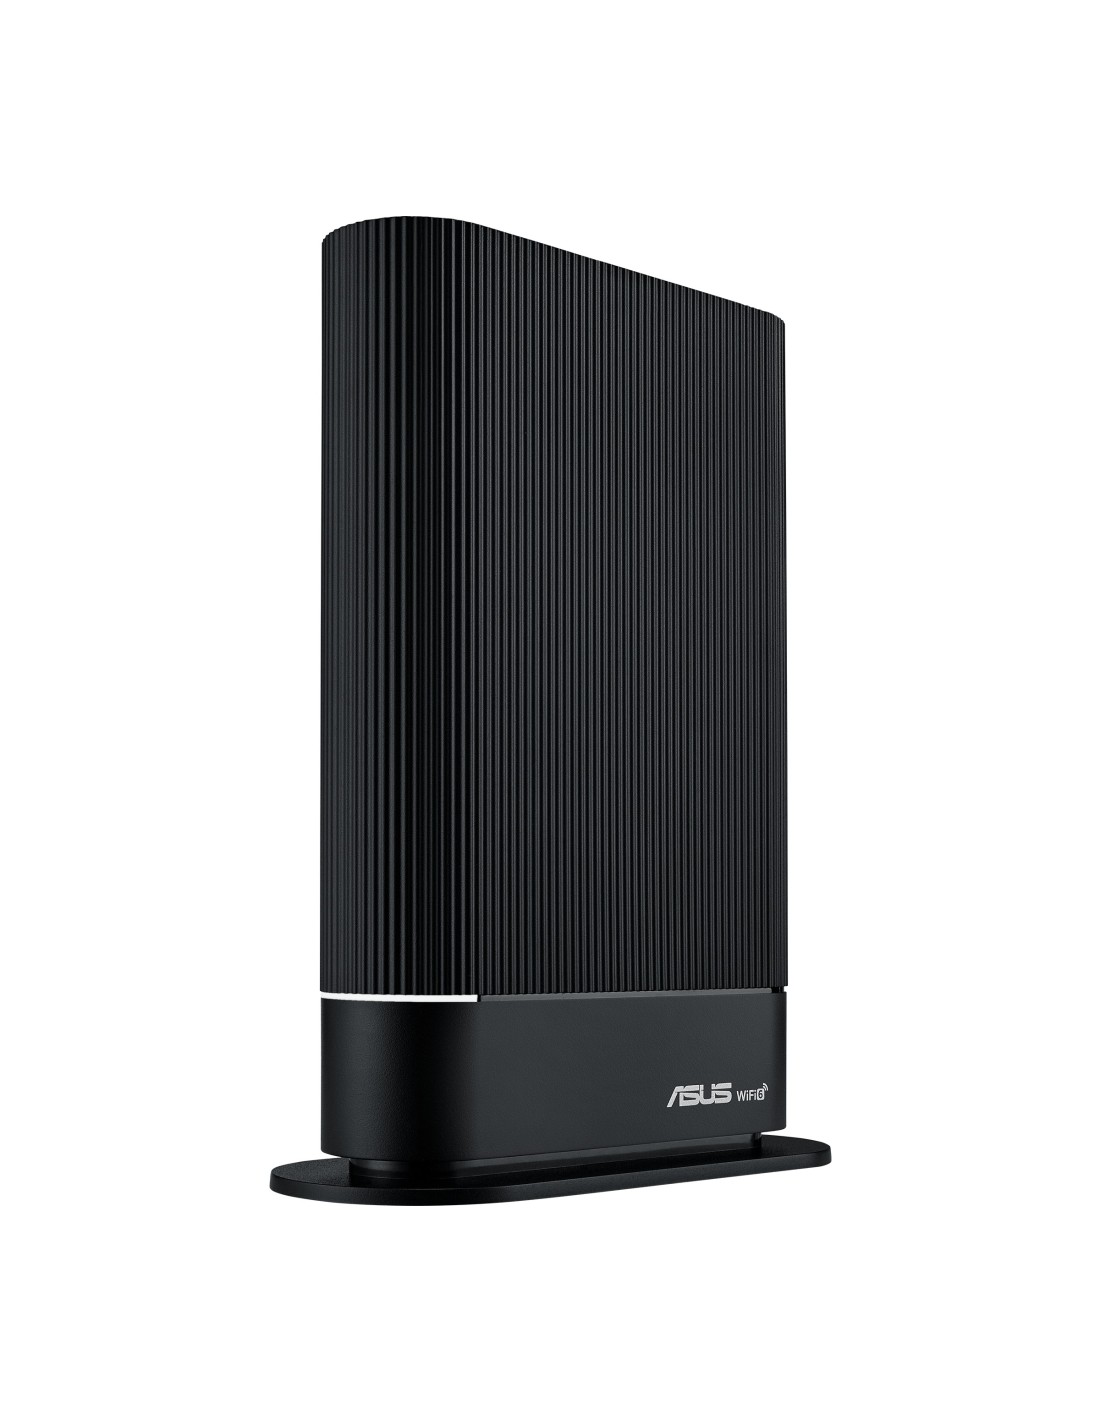 WIRELESS ROUTEr ASUS RT-AX59U GIGABIT ETHERNET DUAL-BAND